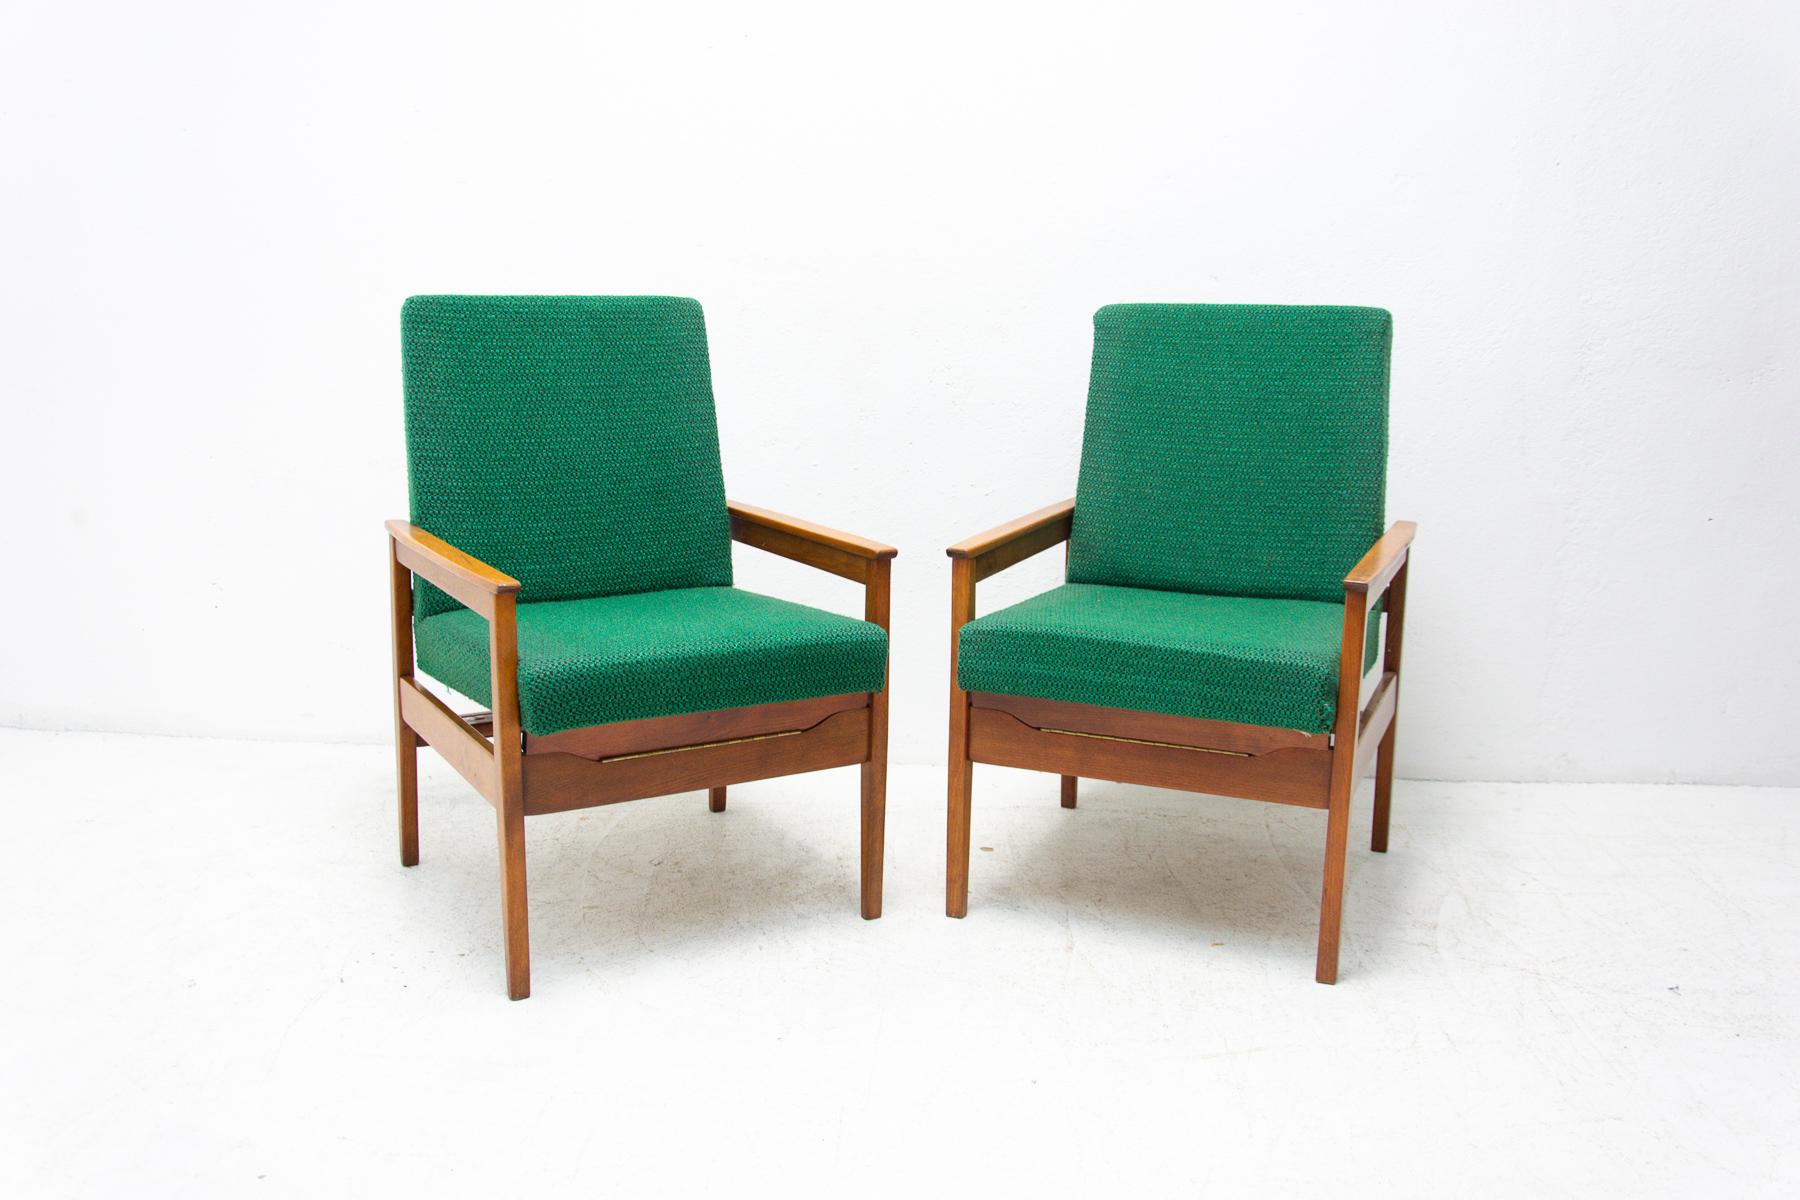 Pair of mid century armchairs, made in the 1960´s in the former Czechoslovakia. The structure is made of beech wood, the chairs has an original upholstery. In very good vintage condition. Price is for the pair.

Measures: Seat height 43 cm.